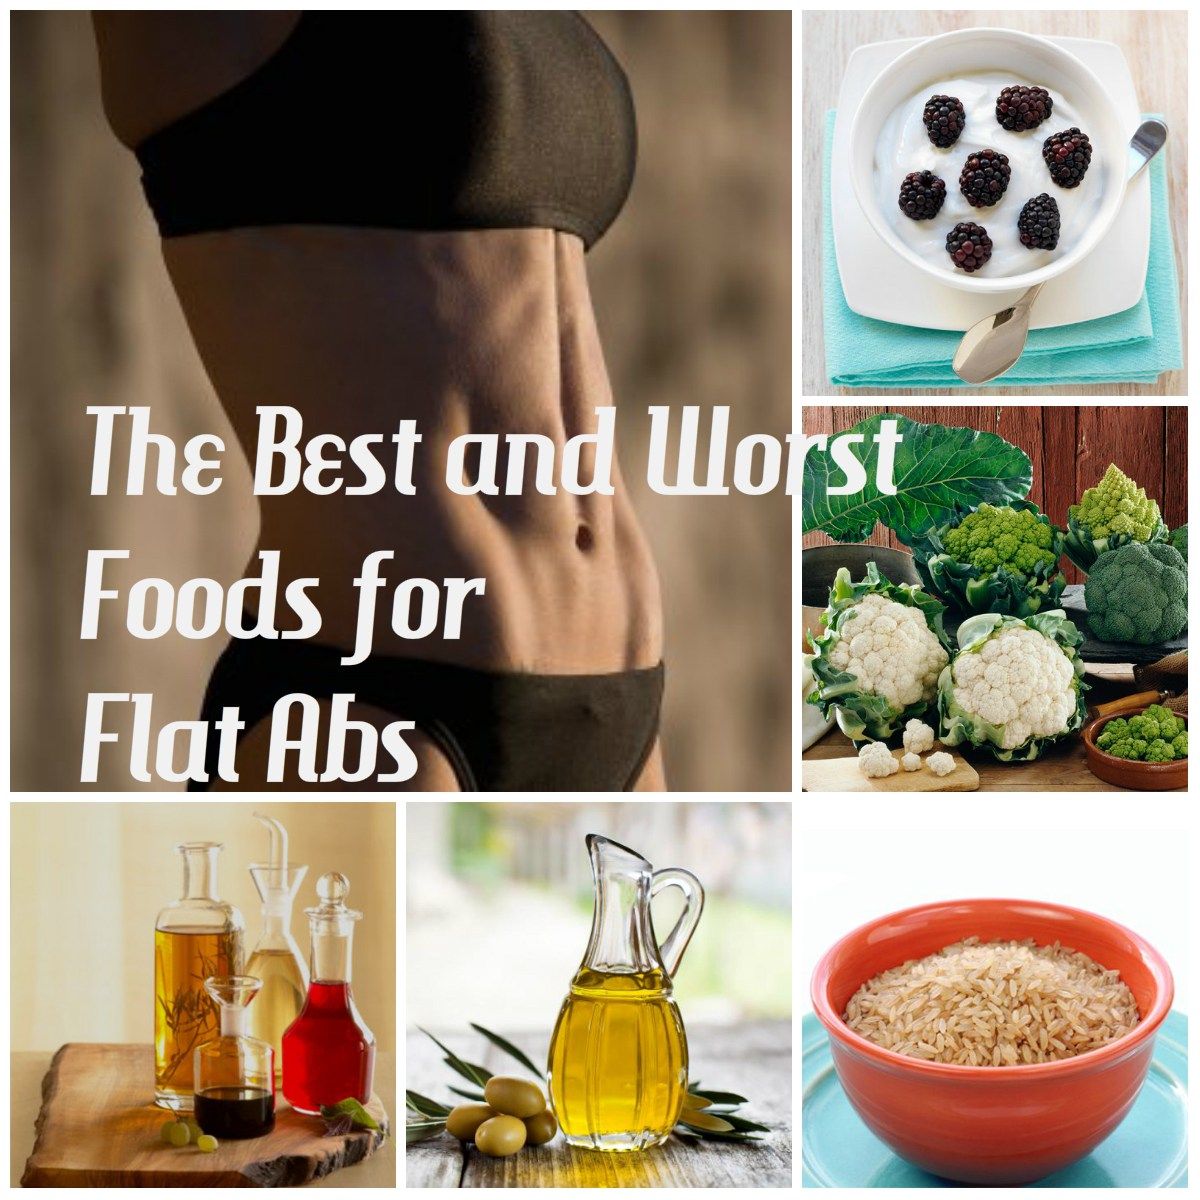 The Best and Worst Foods for Flat Abs